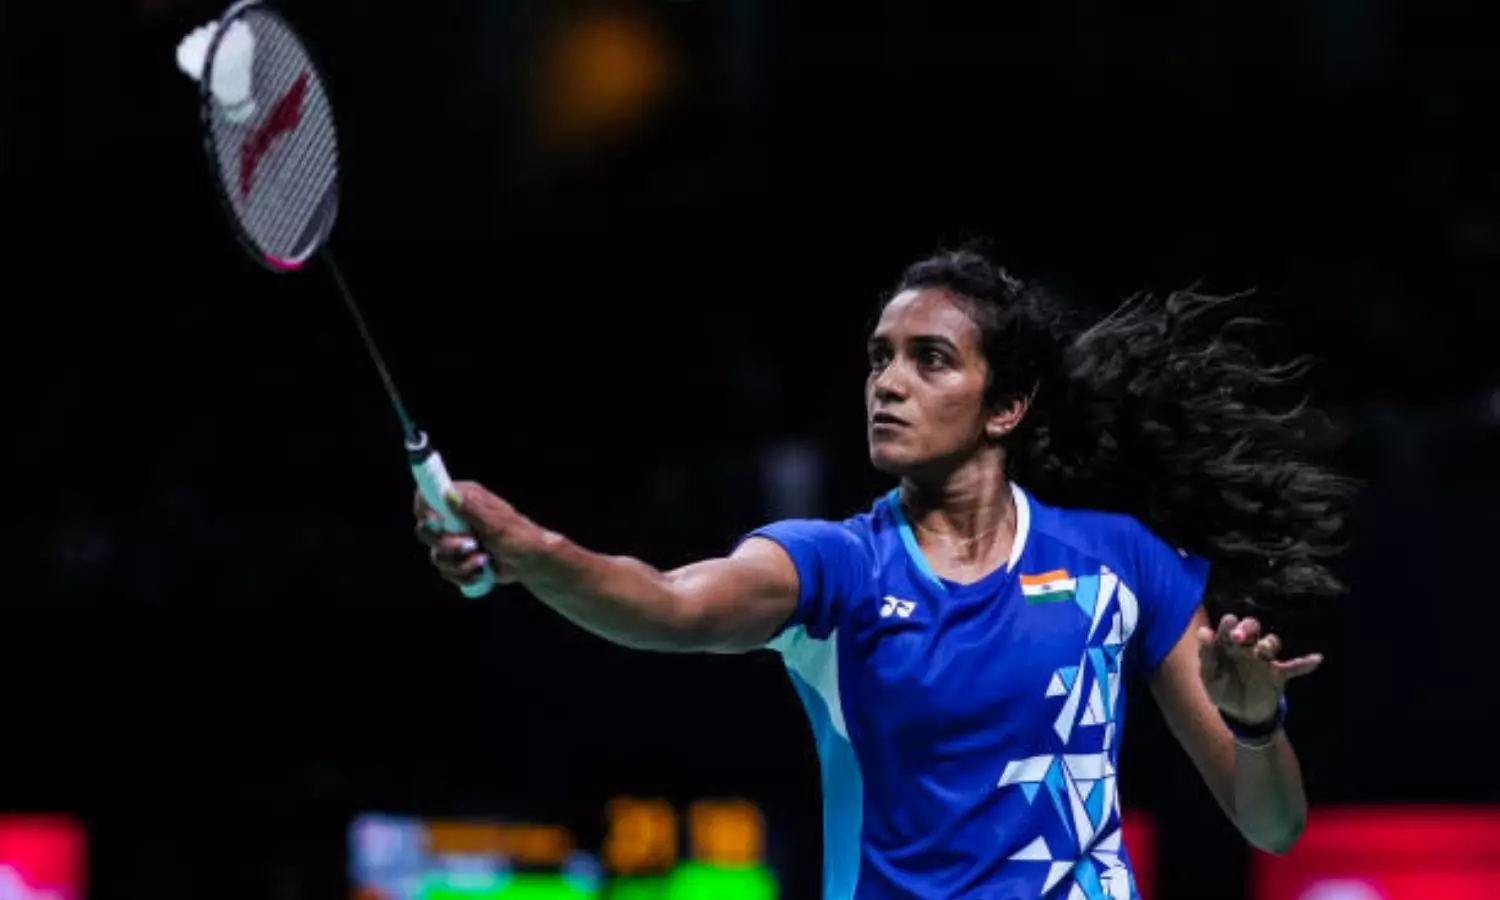 Malaysia Masters 2022 Sindhu, Prannoy seek momentum — All you need to know, Indian squad, Where to watch